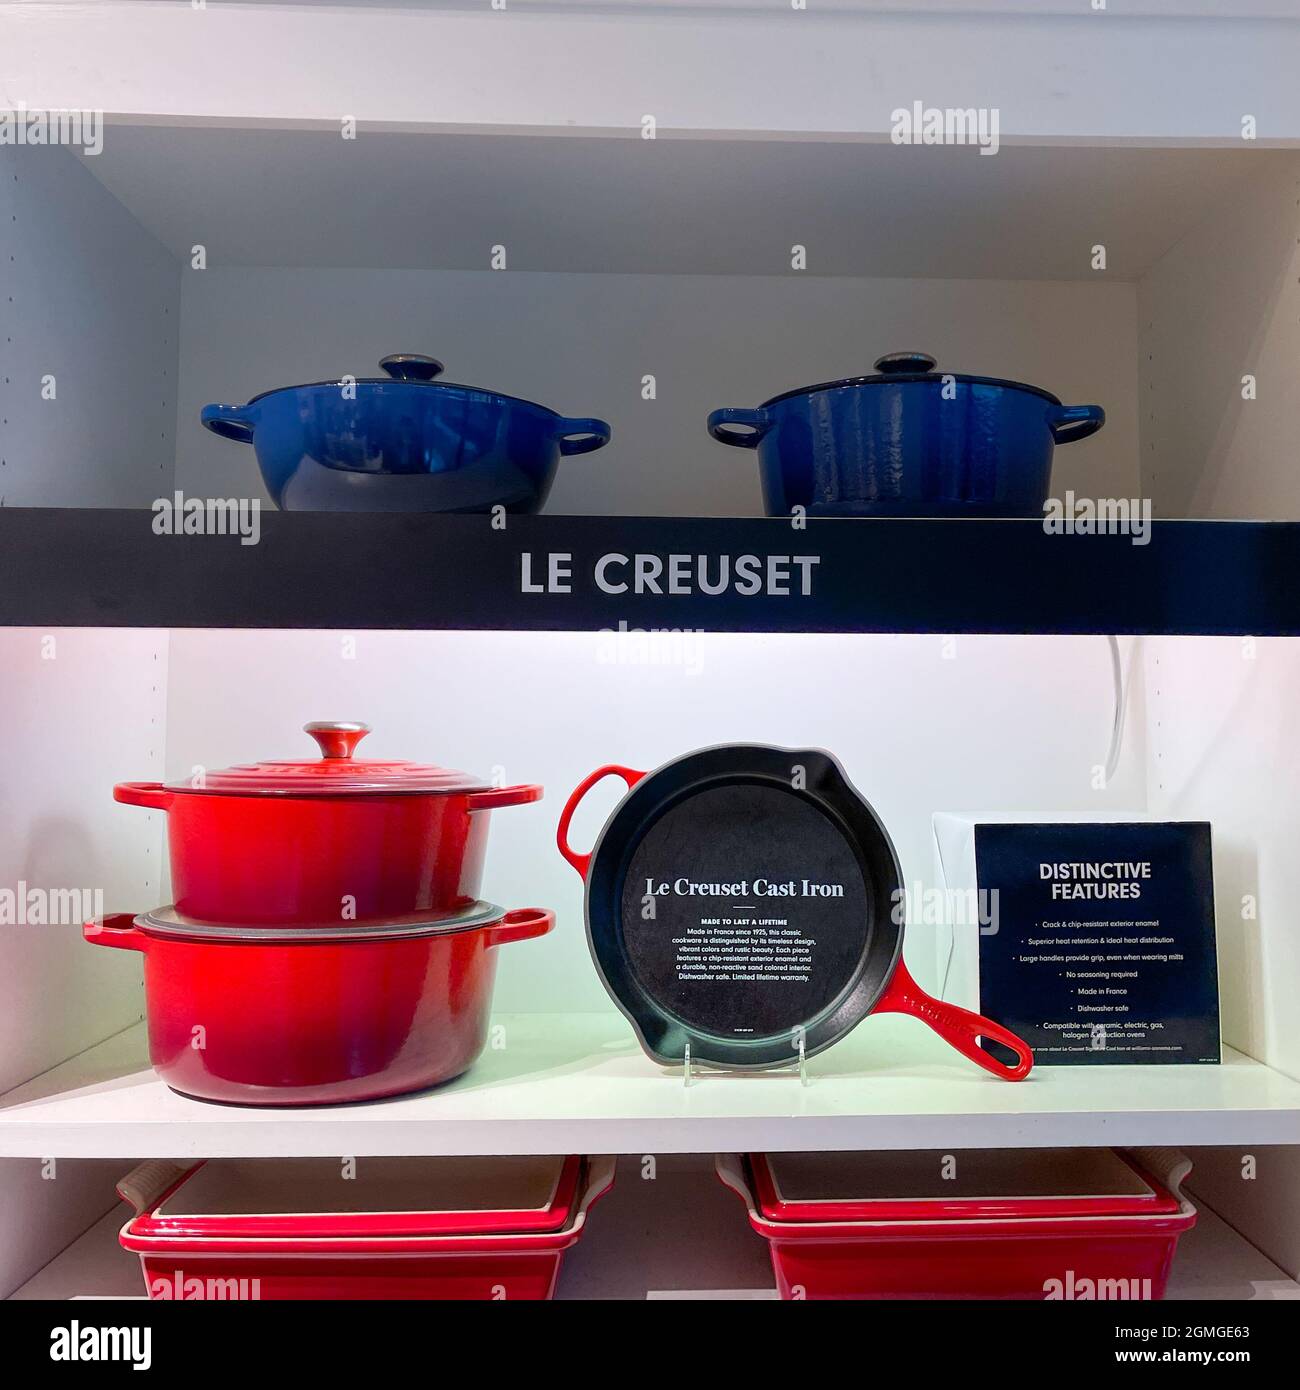 https://c8.alamy.com/comp/2GMGE63/orlando-fl-usa-september-9-2021-the-le-creuset-pot-and-pan-aisle-at-a-williams-sonoma-store-at-an-indoor-mall-in-orlando-florida-2GMGE63.jpg